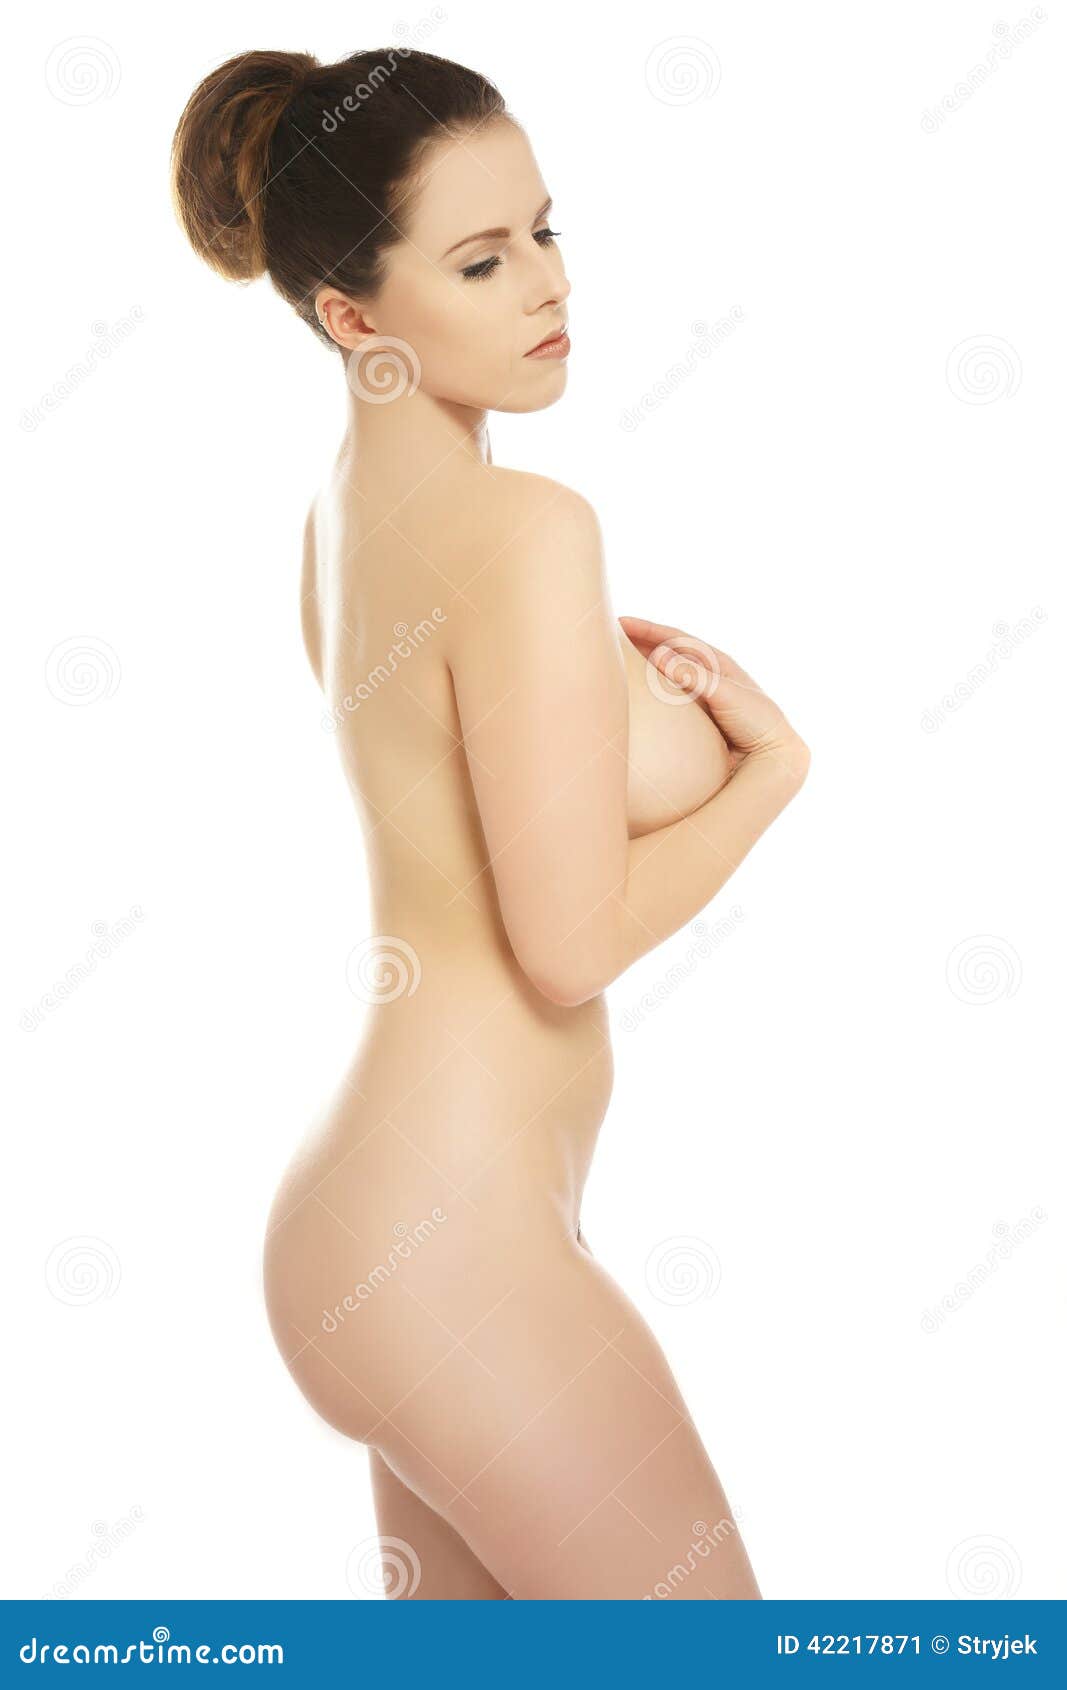 courtney ostrom recommends nude female side view pic